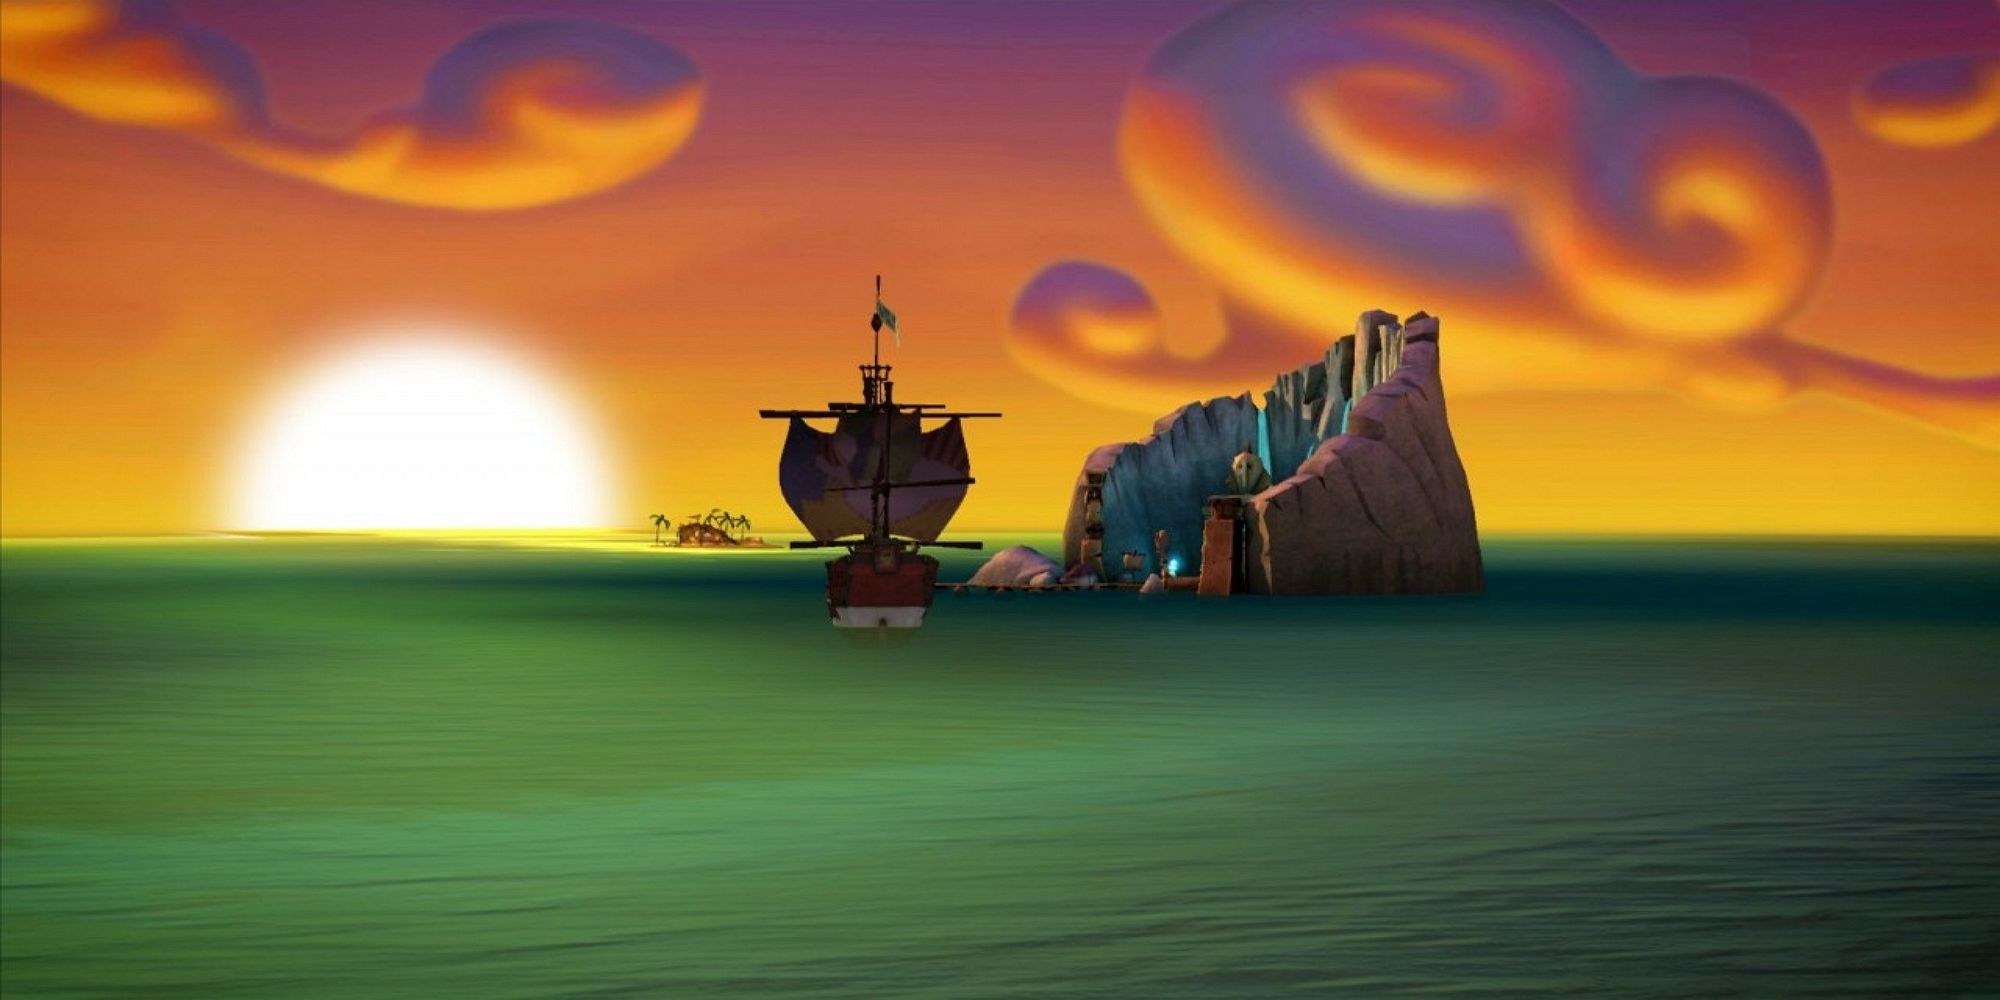 a pirate ship in "The Seige of Spinner Clay" on the high seas